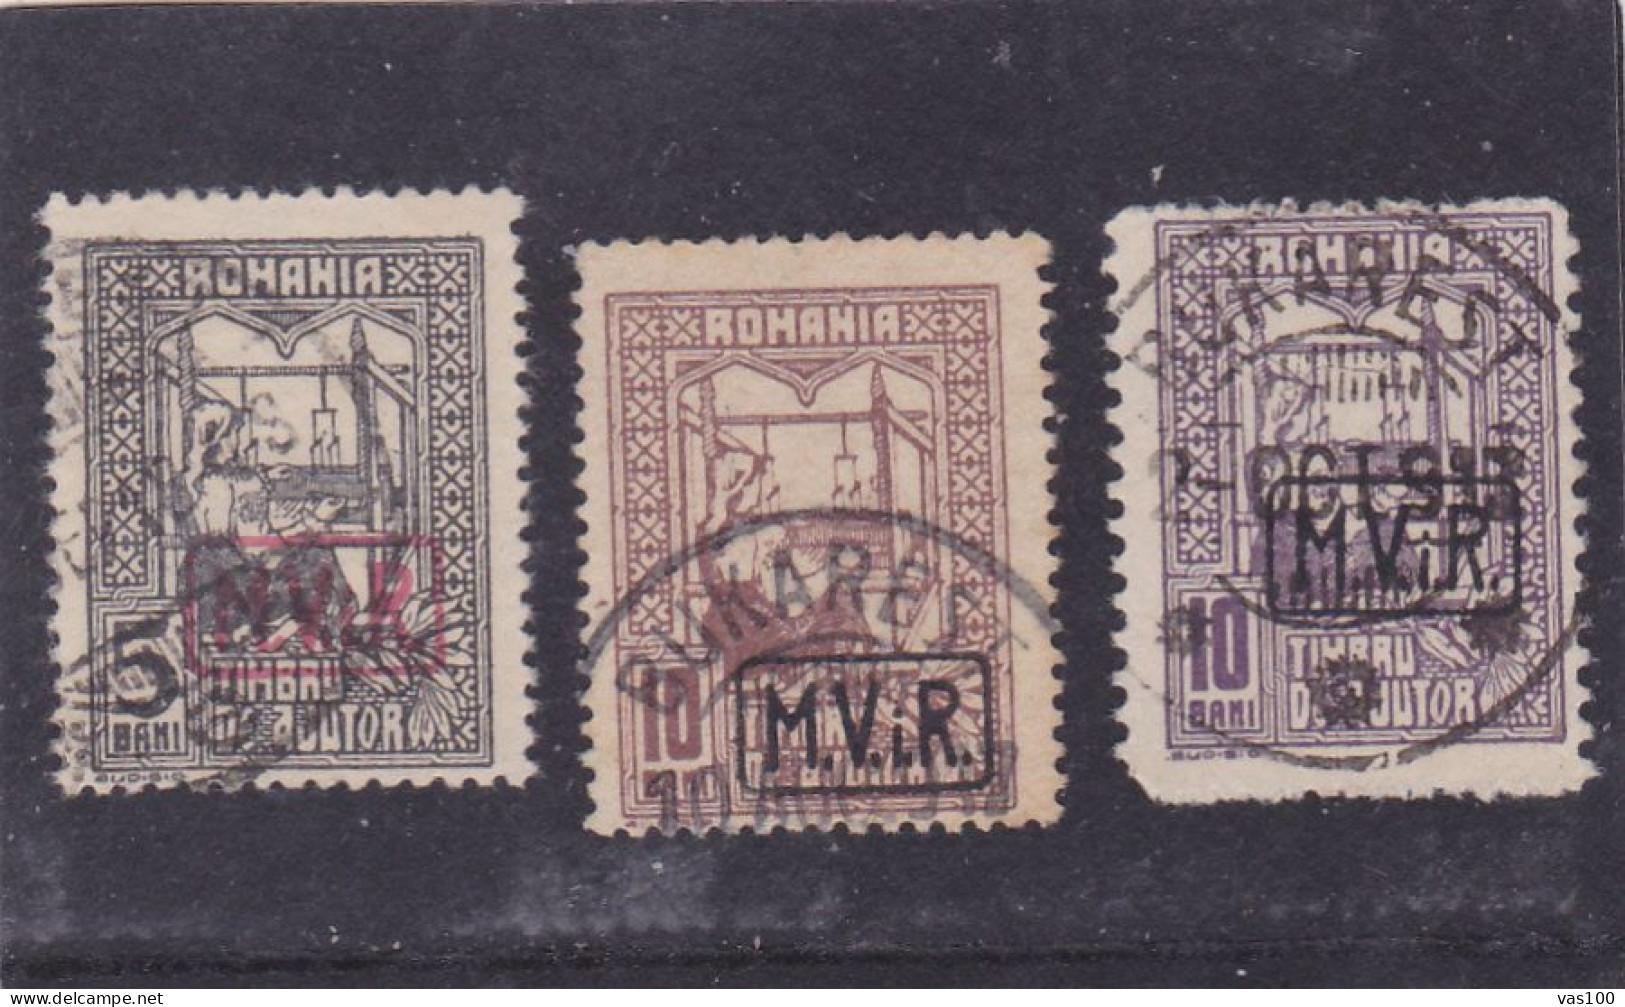 Germany WW1 Occupation In Romania 1917 MViR  3 STAMPS POSTAGE DUE USED - Foreign Occupations